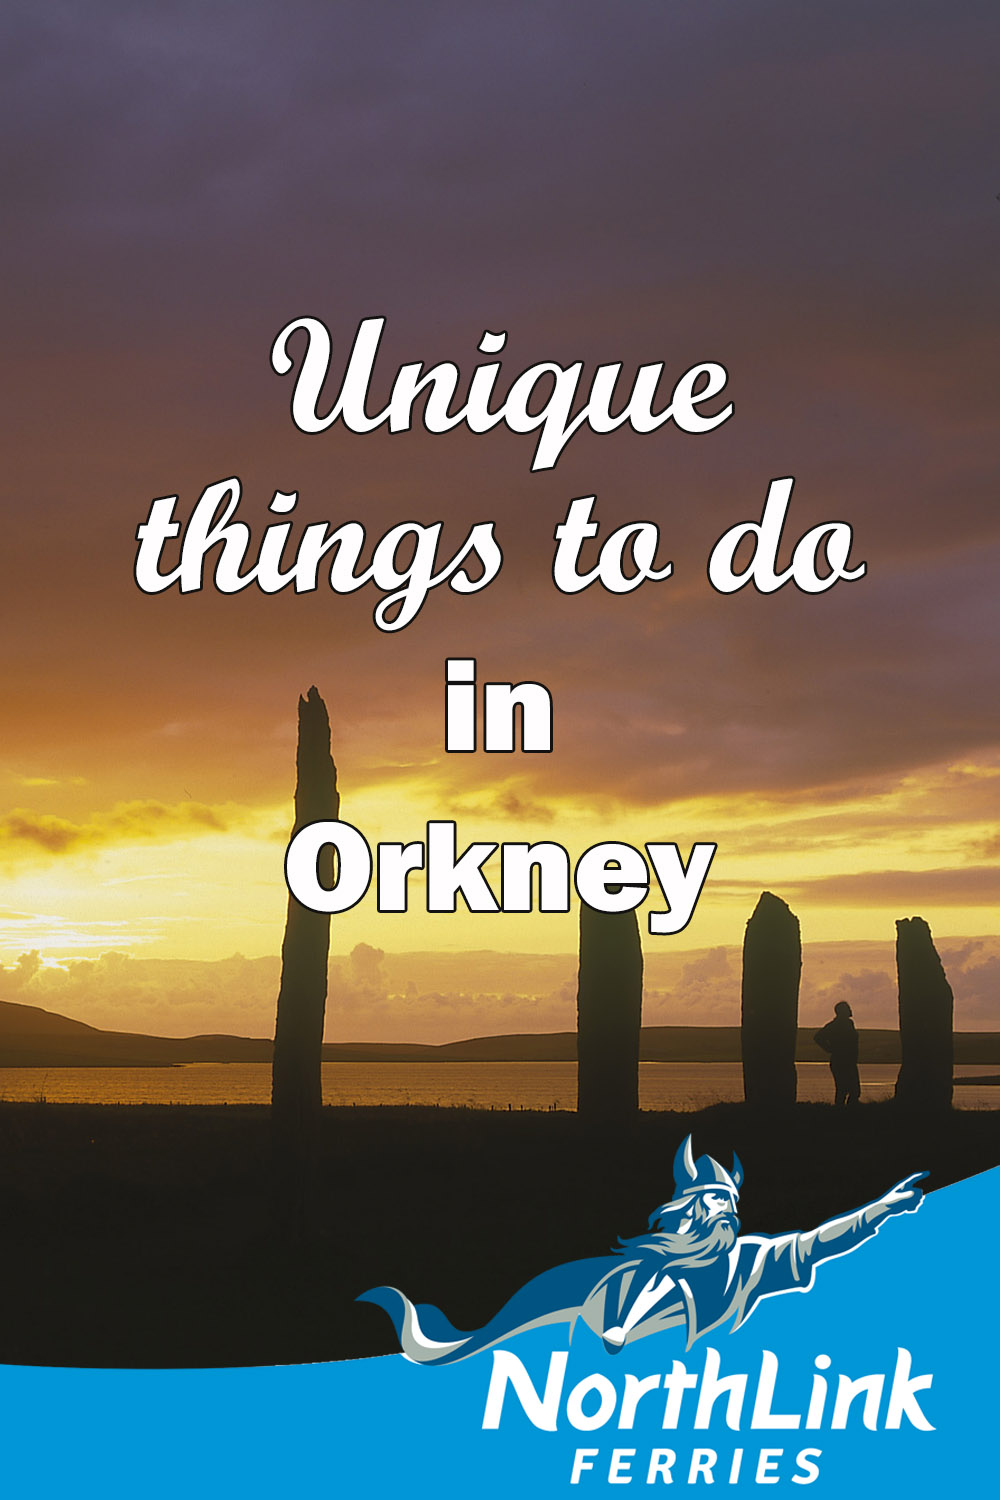 Unique things to do in Orkney